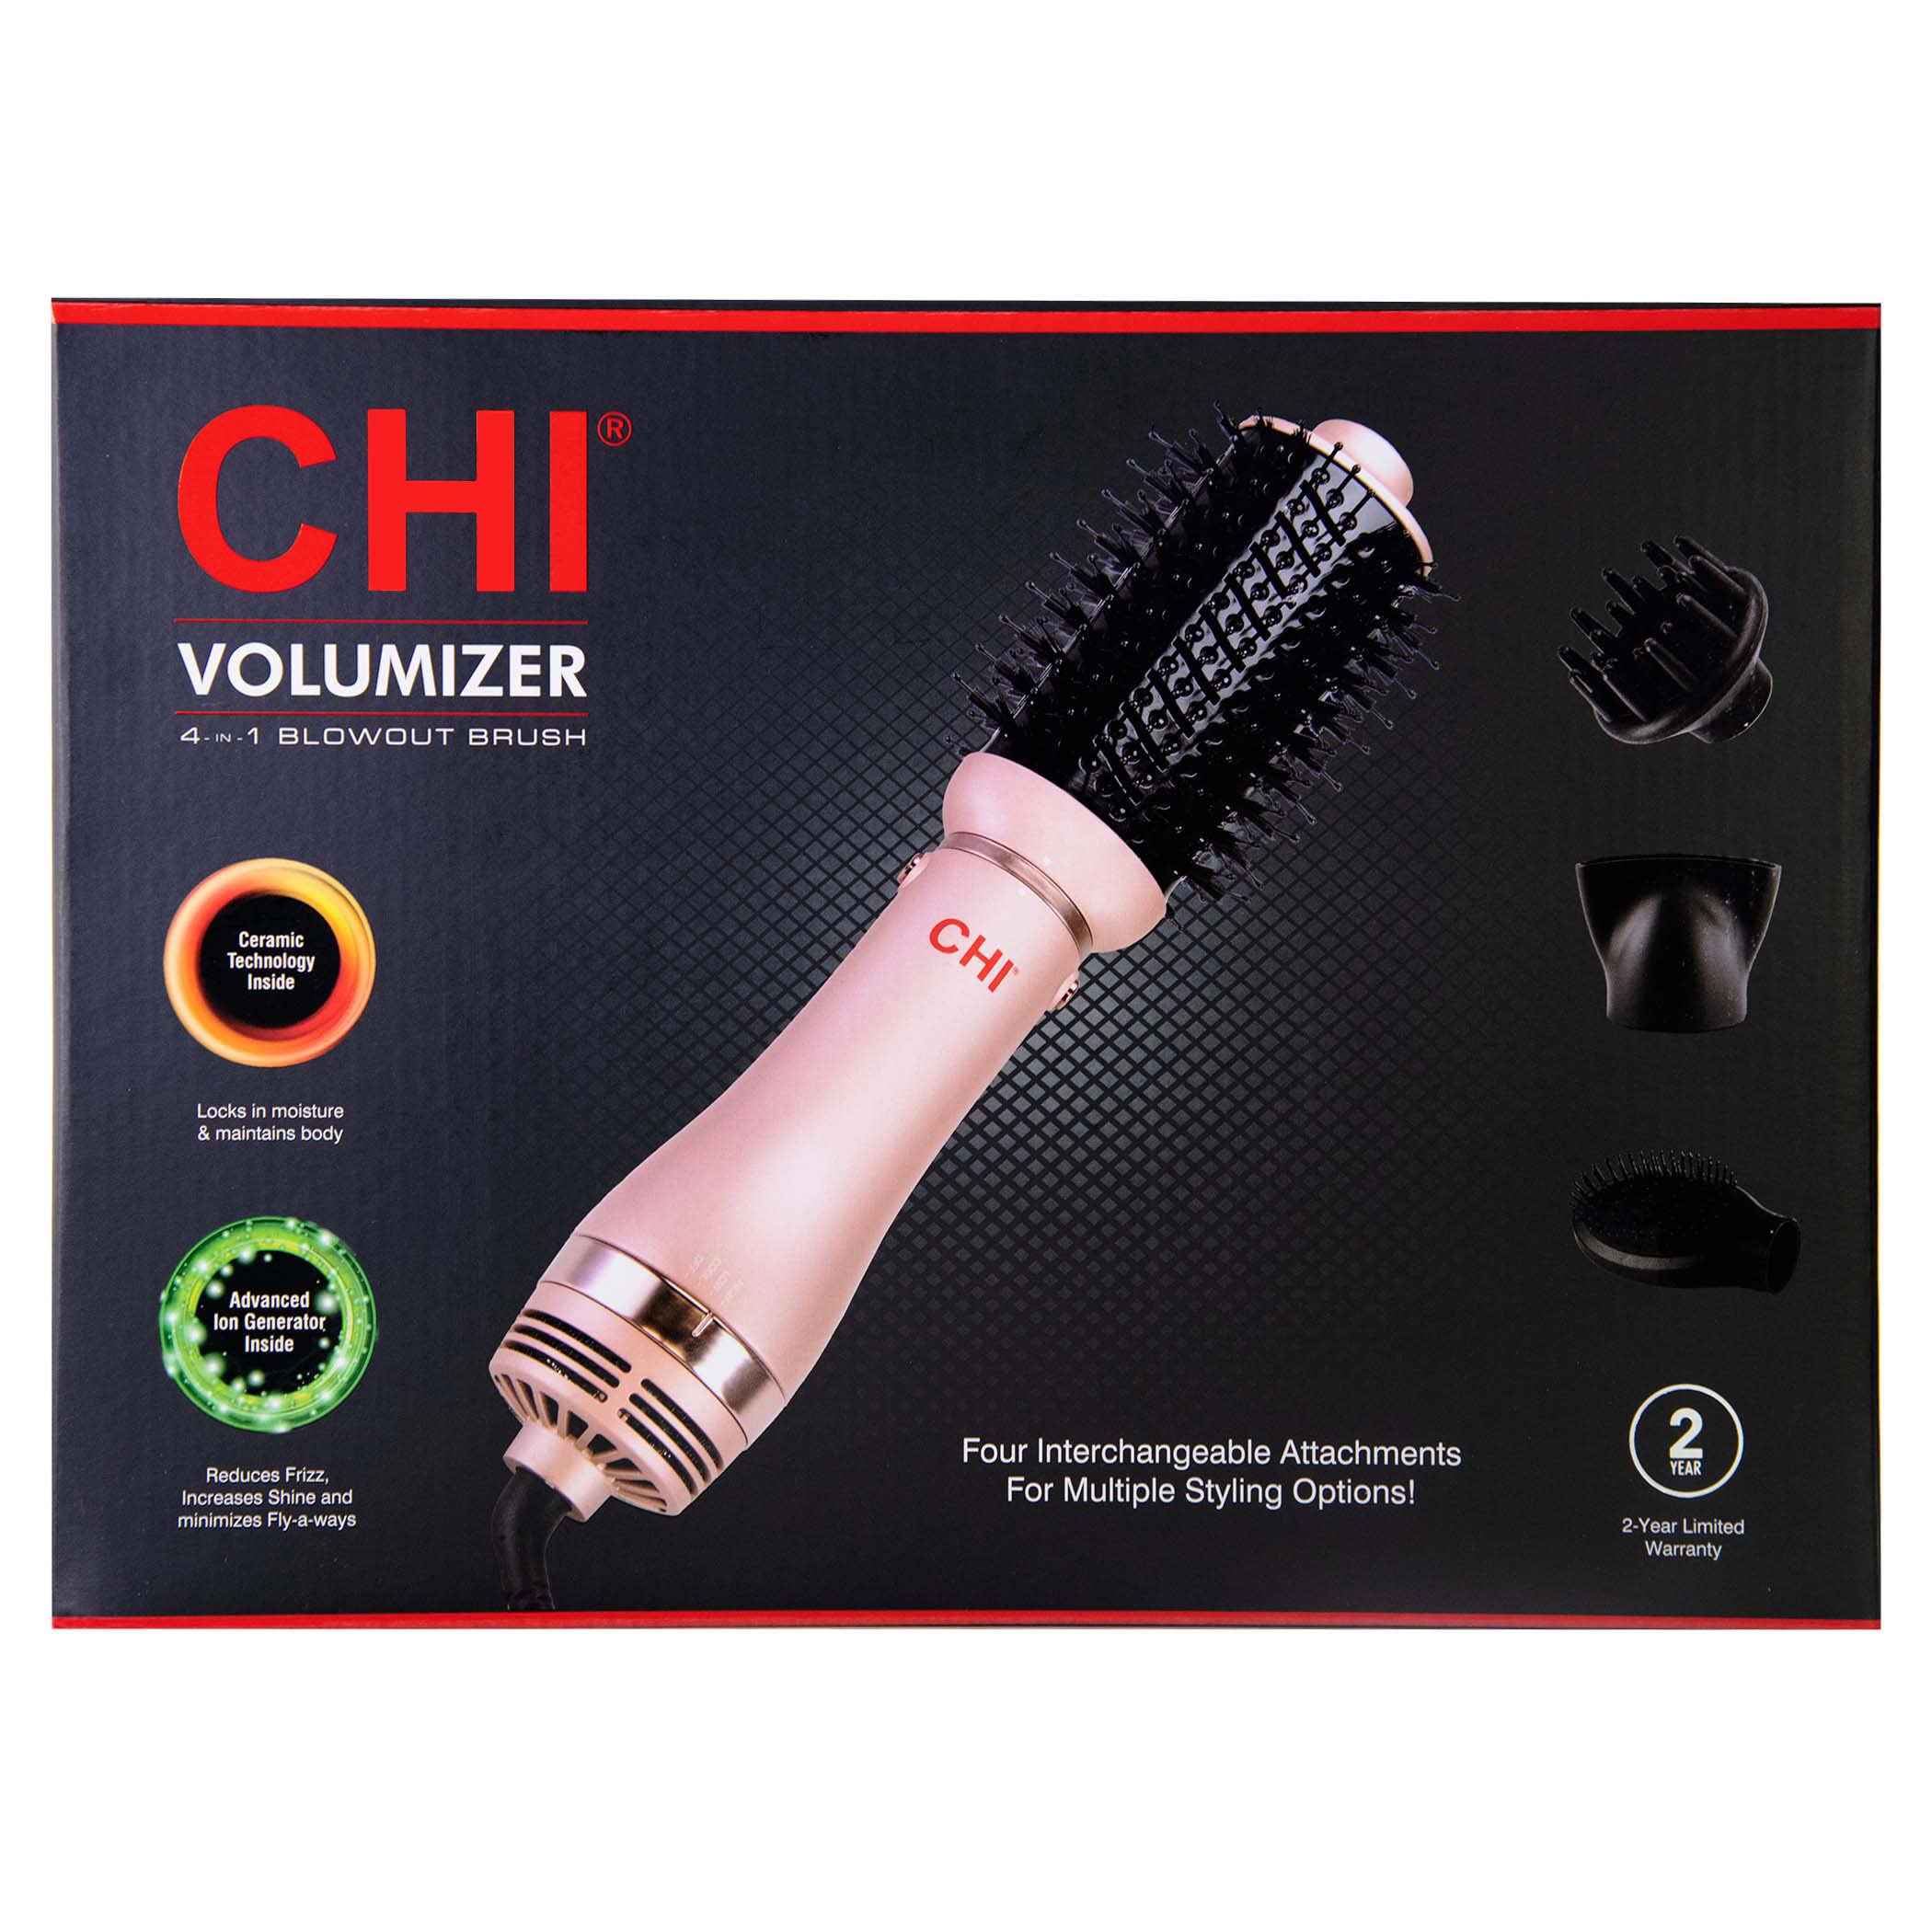 CHI Volumizer 4-in-1 Blowout Brush, Rose Gold